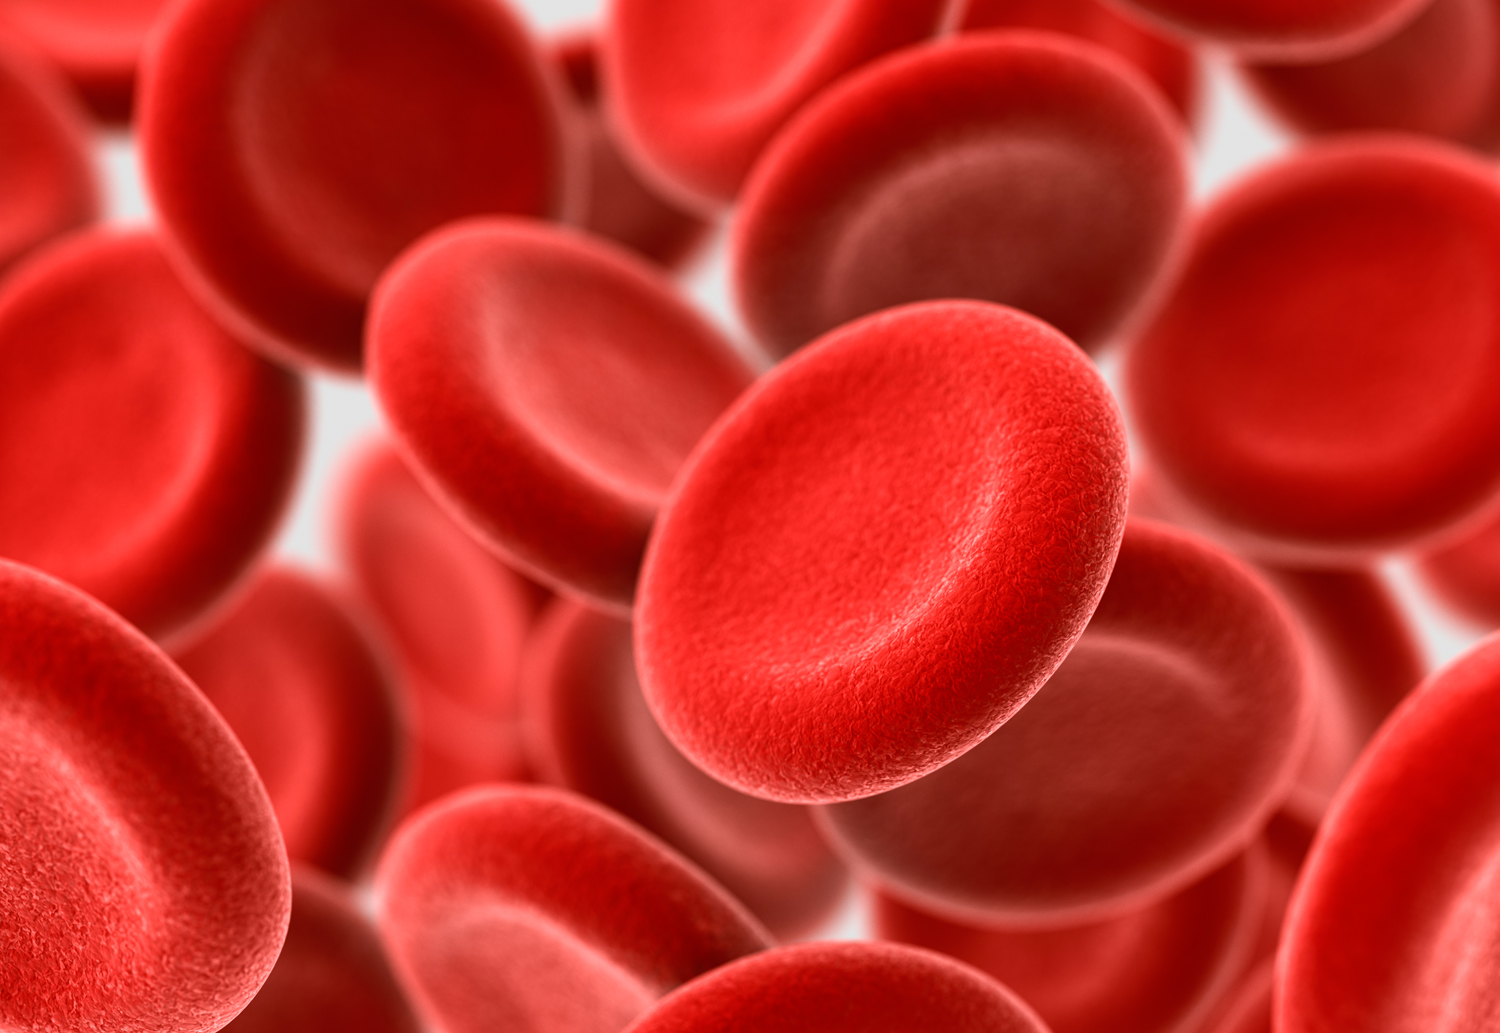 thigns women want men to know - red blood cells